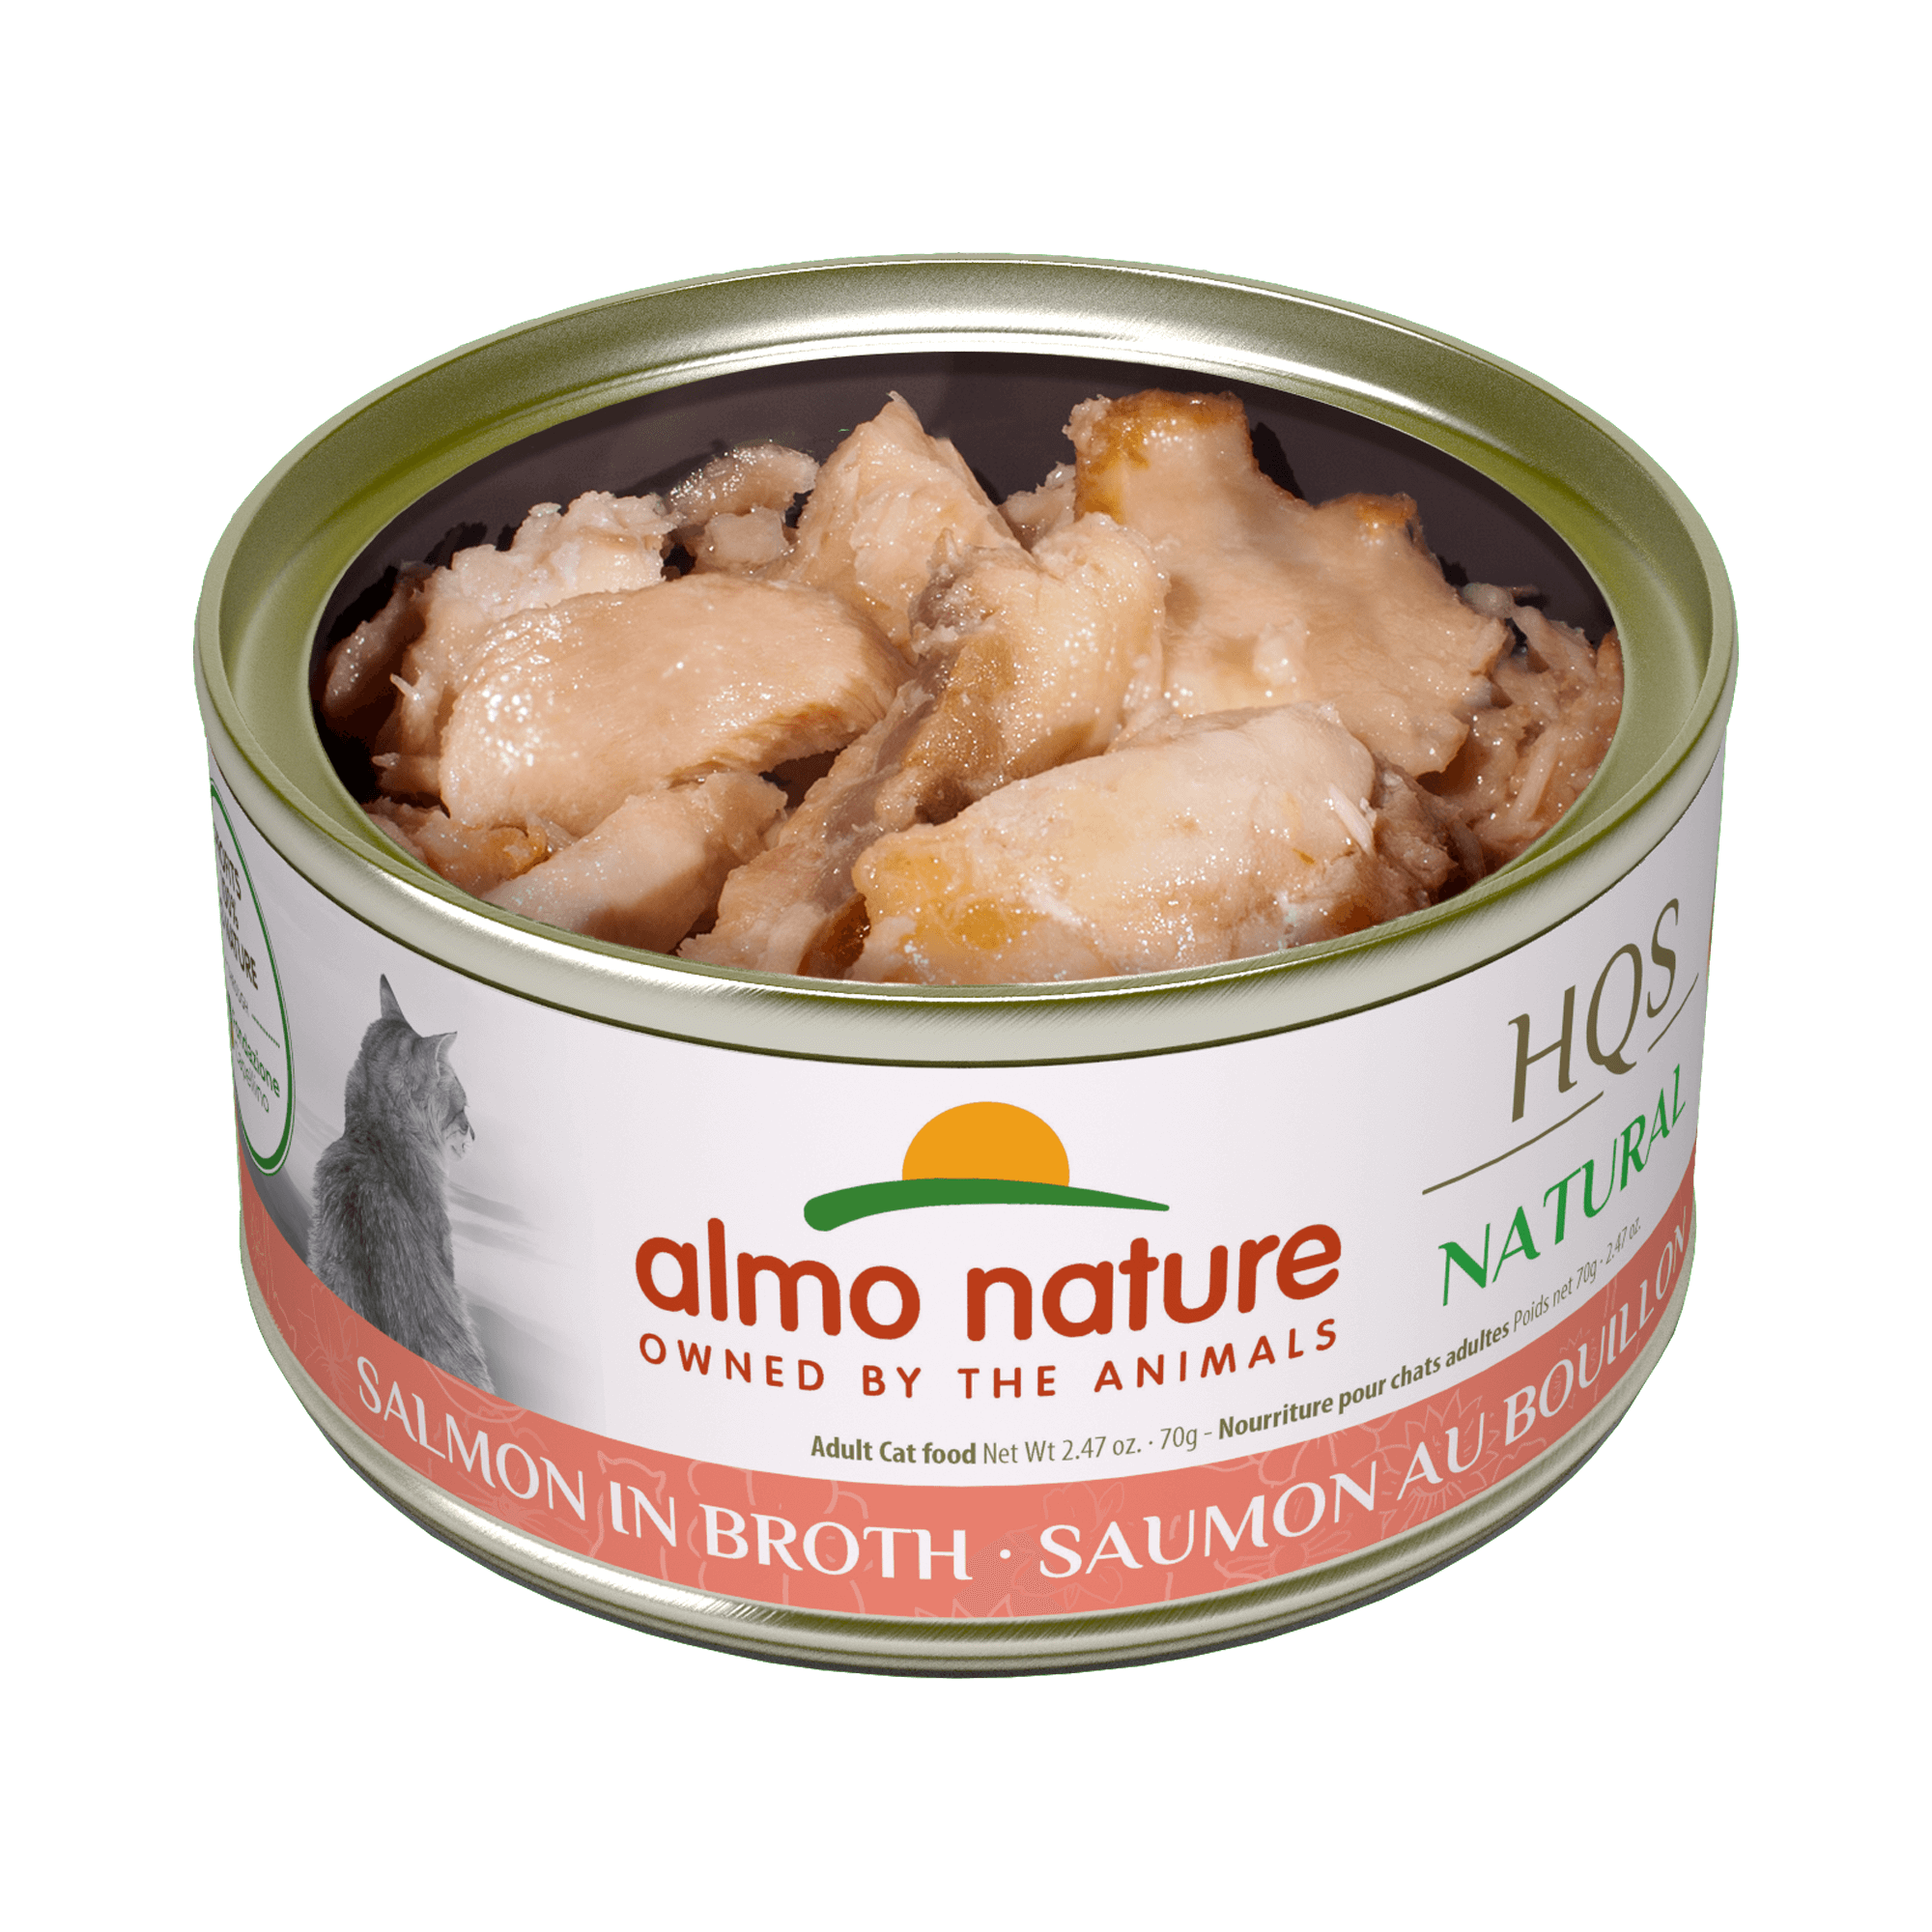 Almo Nature - HQS Natural Salmon in Broth (Wet Cat Food)